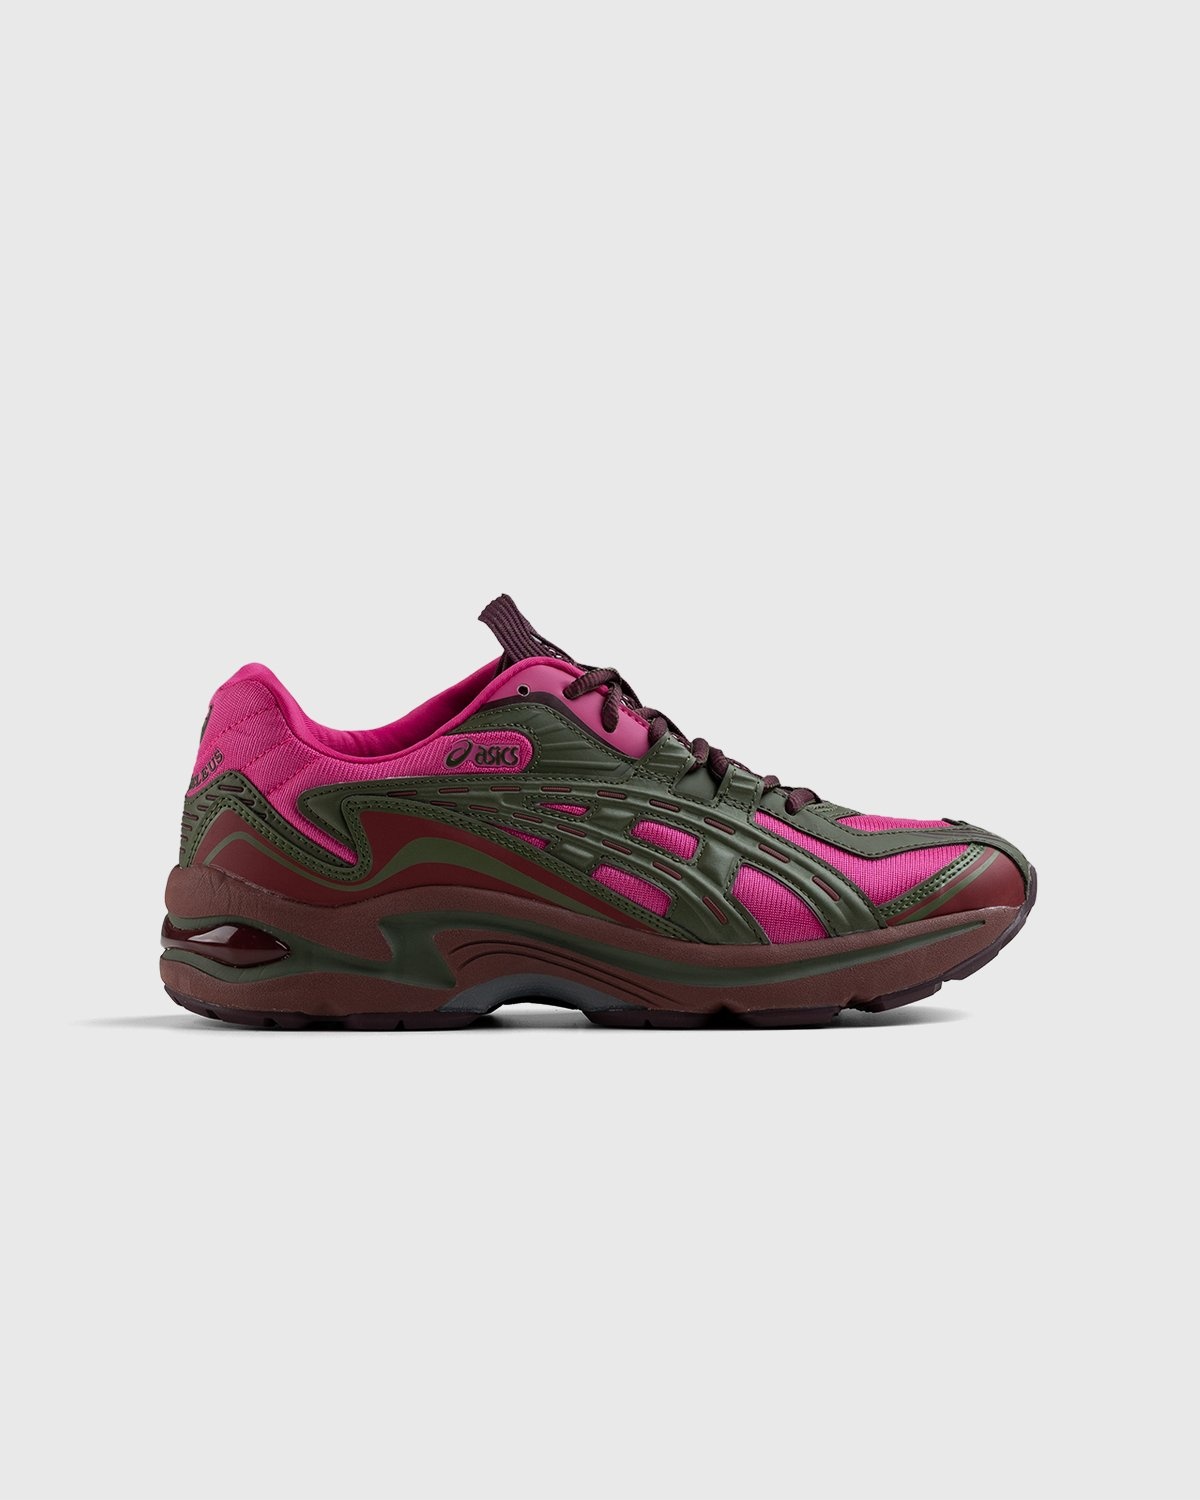 asics – FB1-S Gel-Preleus Pink Rave/Olive Canvas - Low Top Sneakers - Red - Image 1